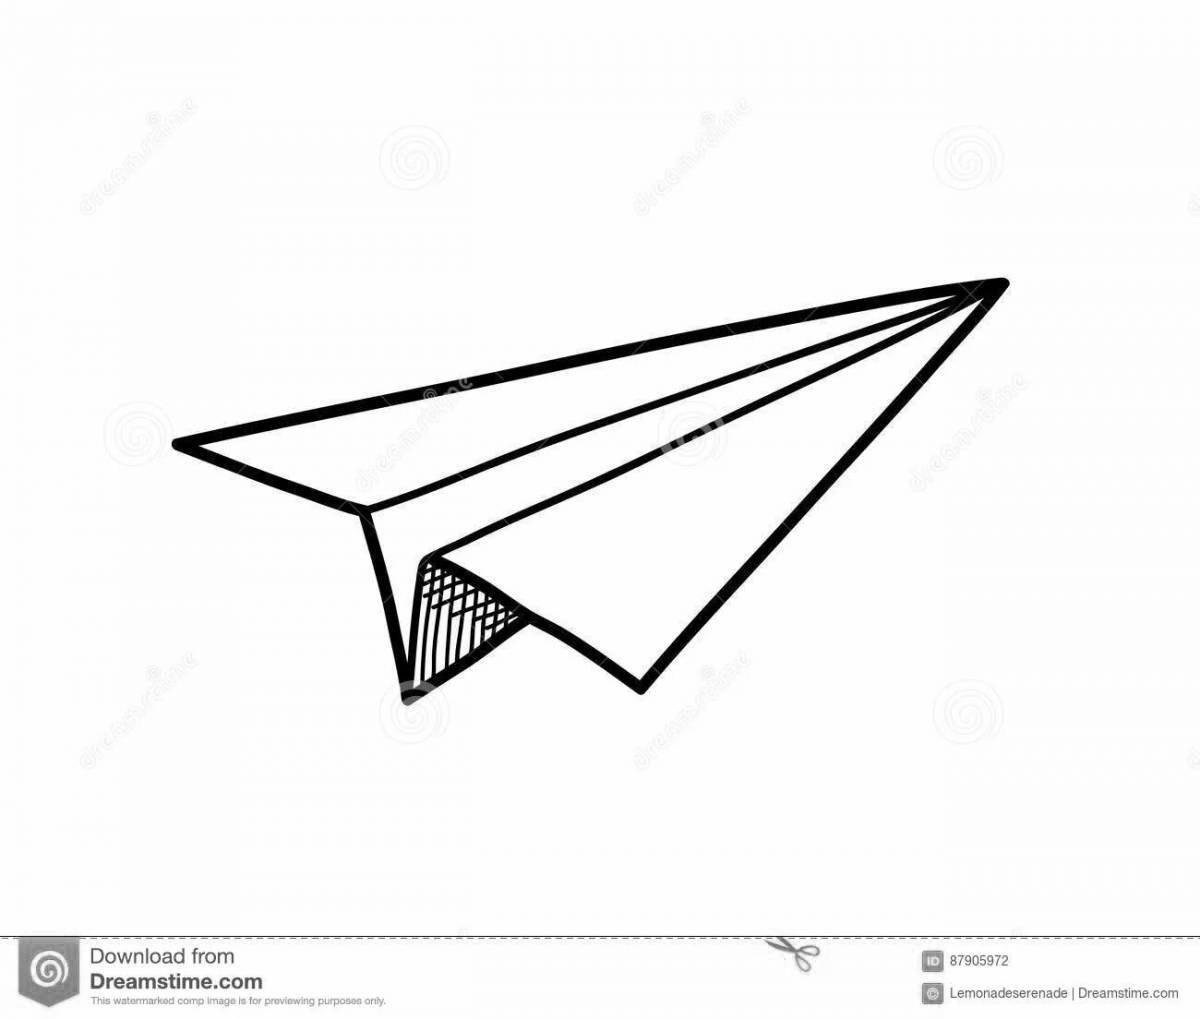 Colourful adventure paper airplane coloring book